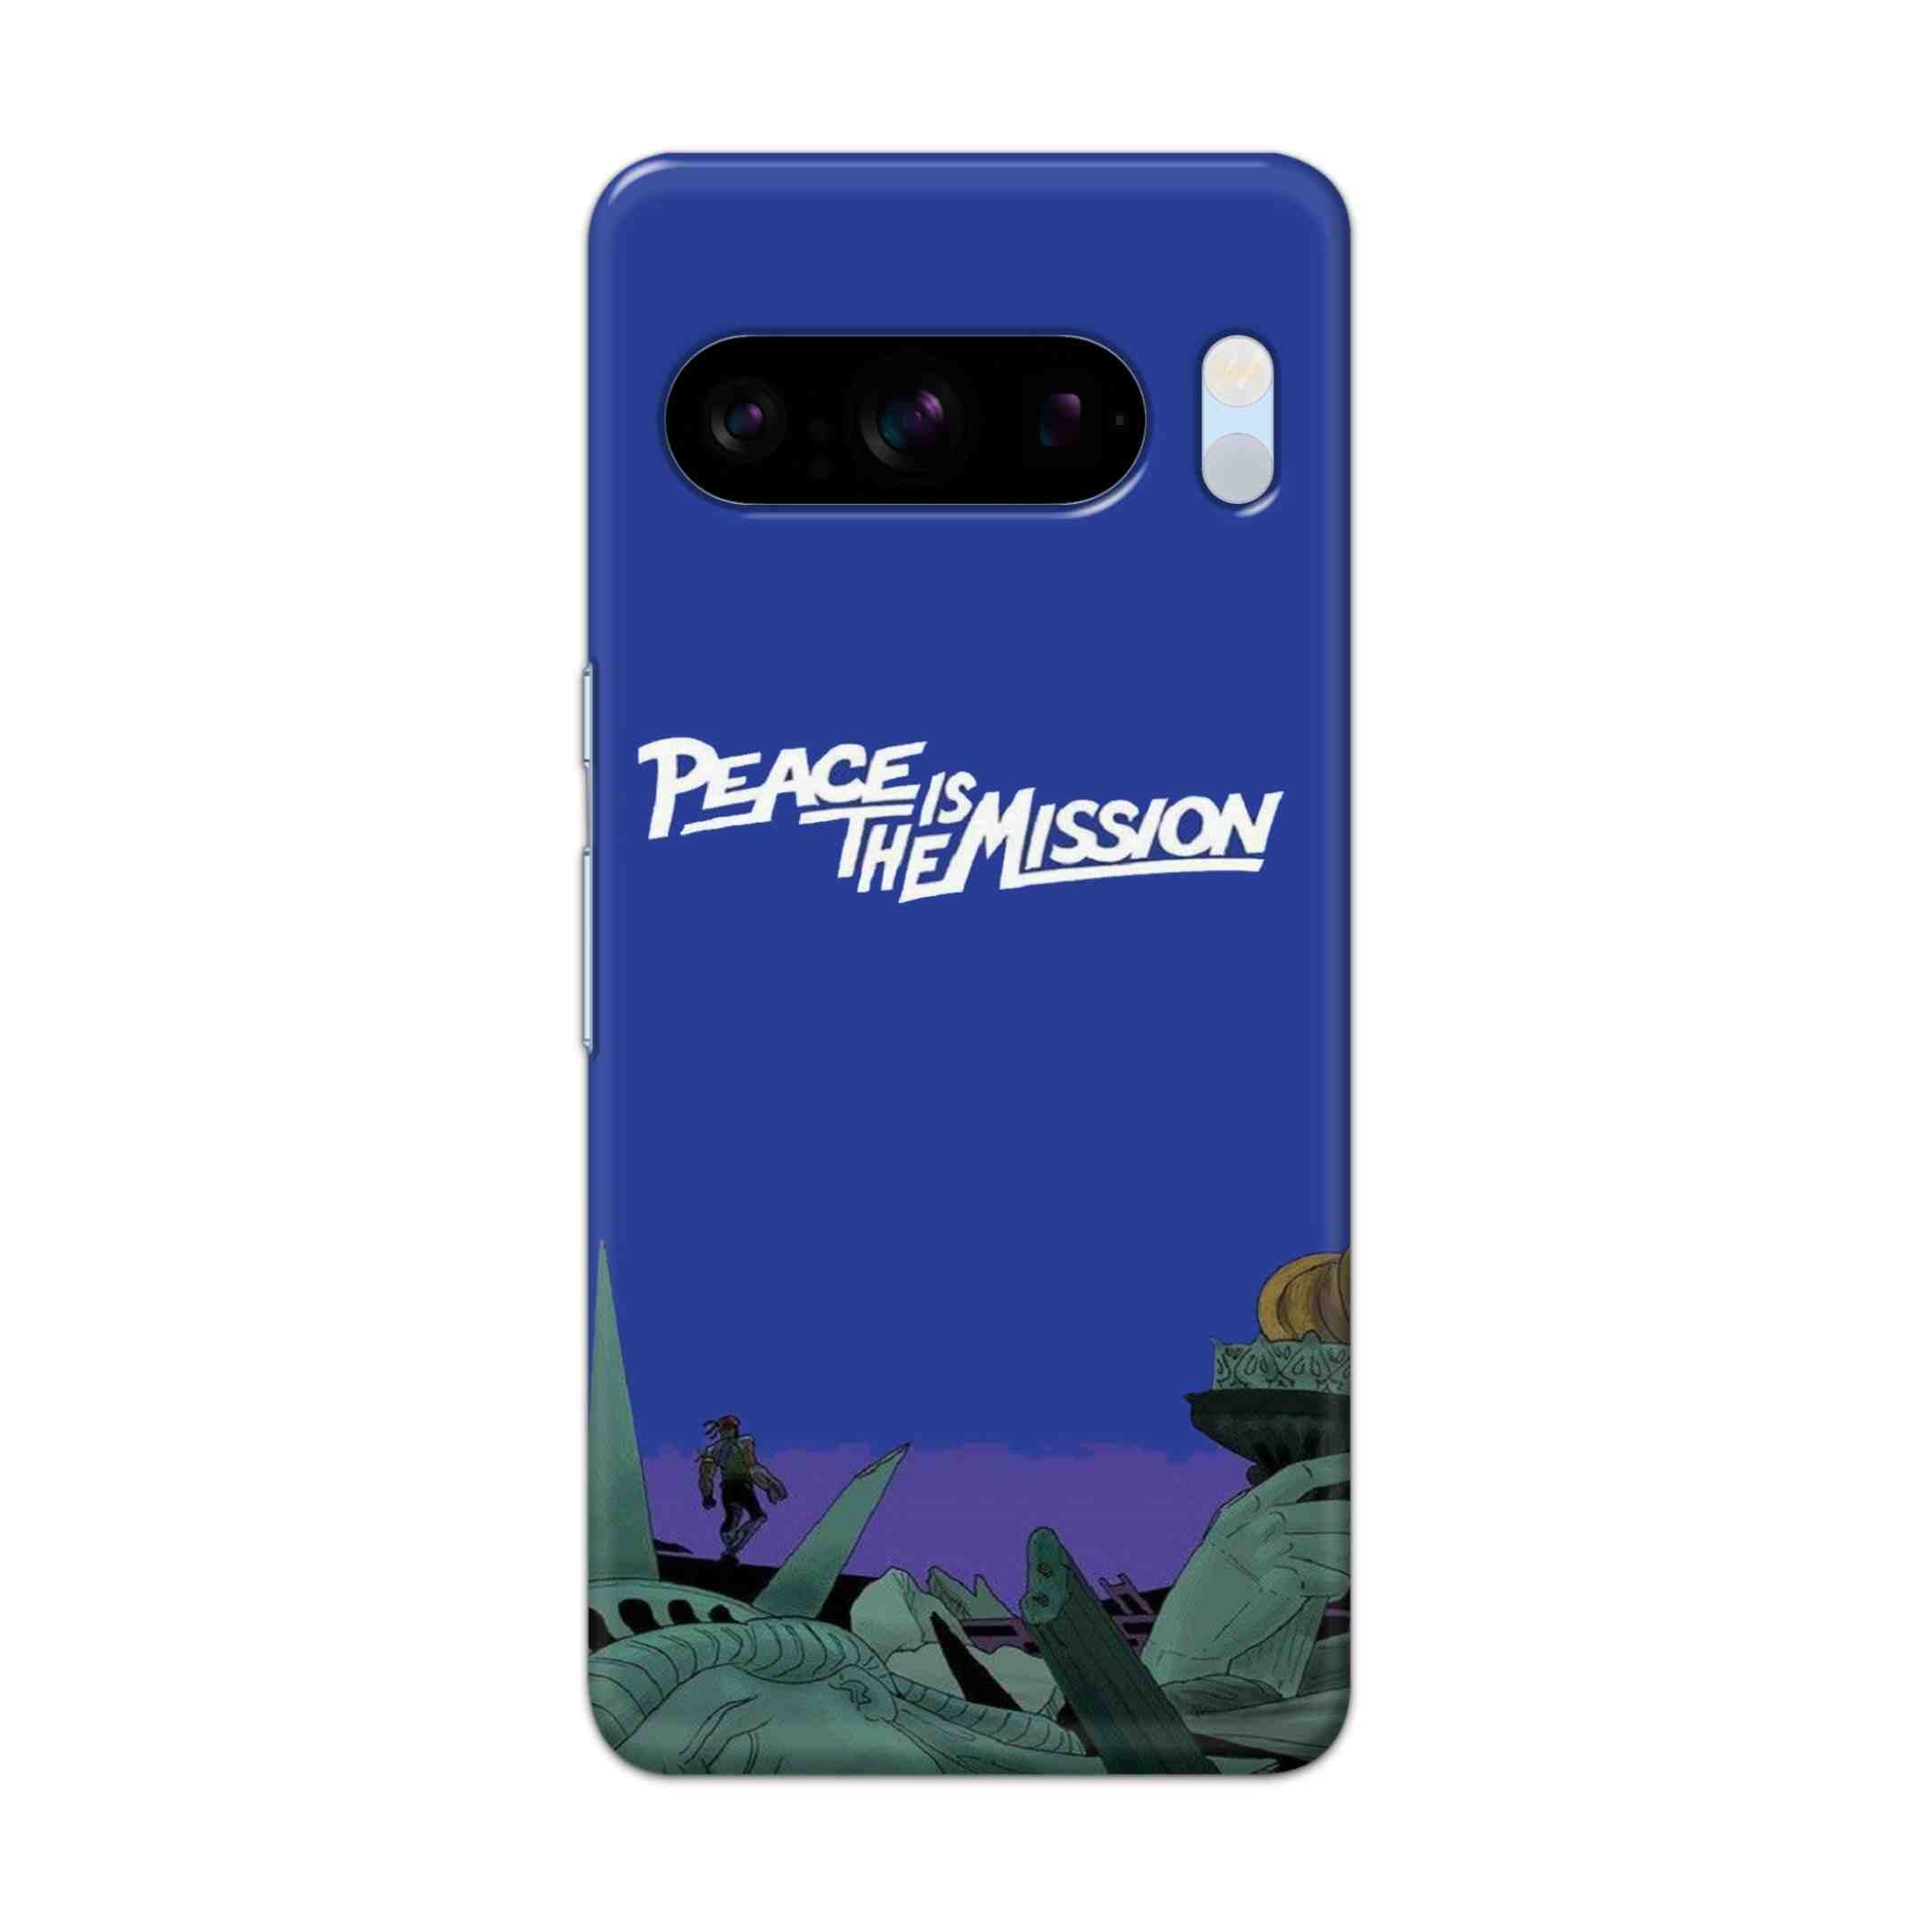 Buy Peace Is The Misson Hard Back Mobile Phone Case/Cover For Pixel 8 Pro Online